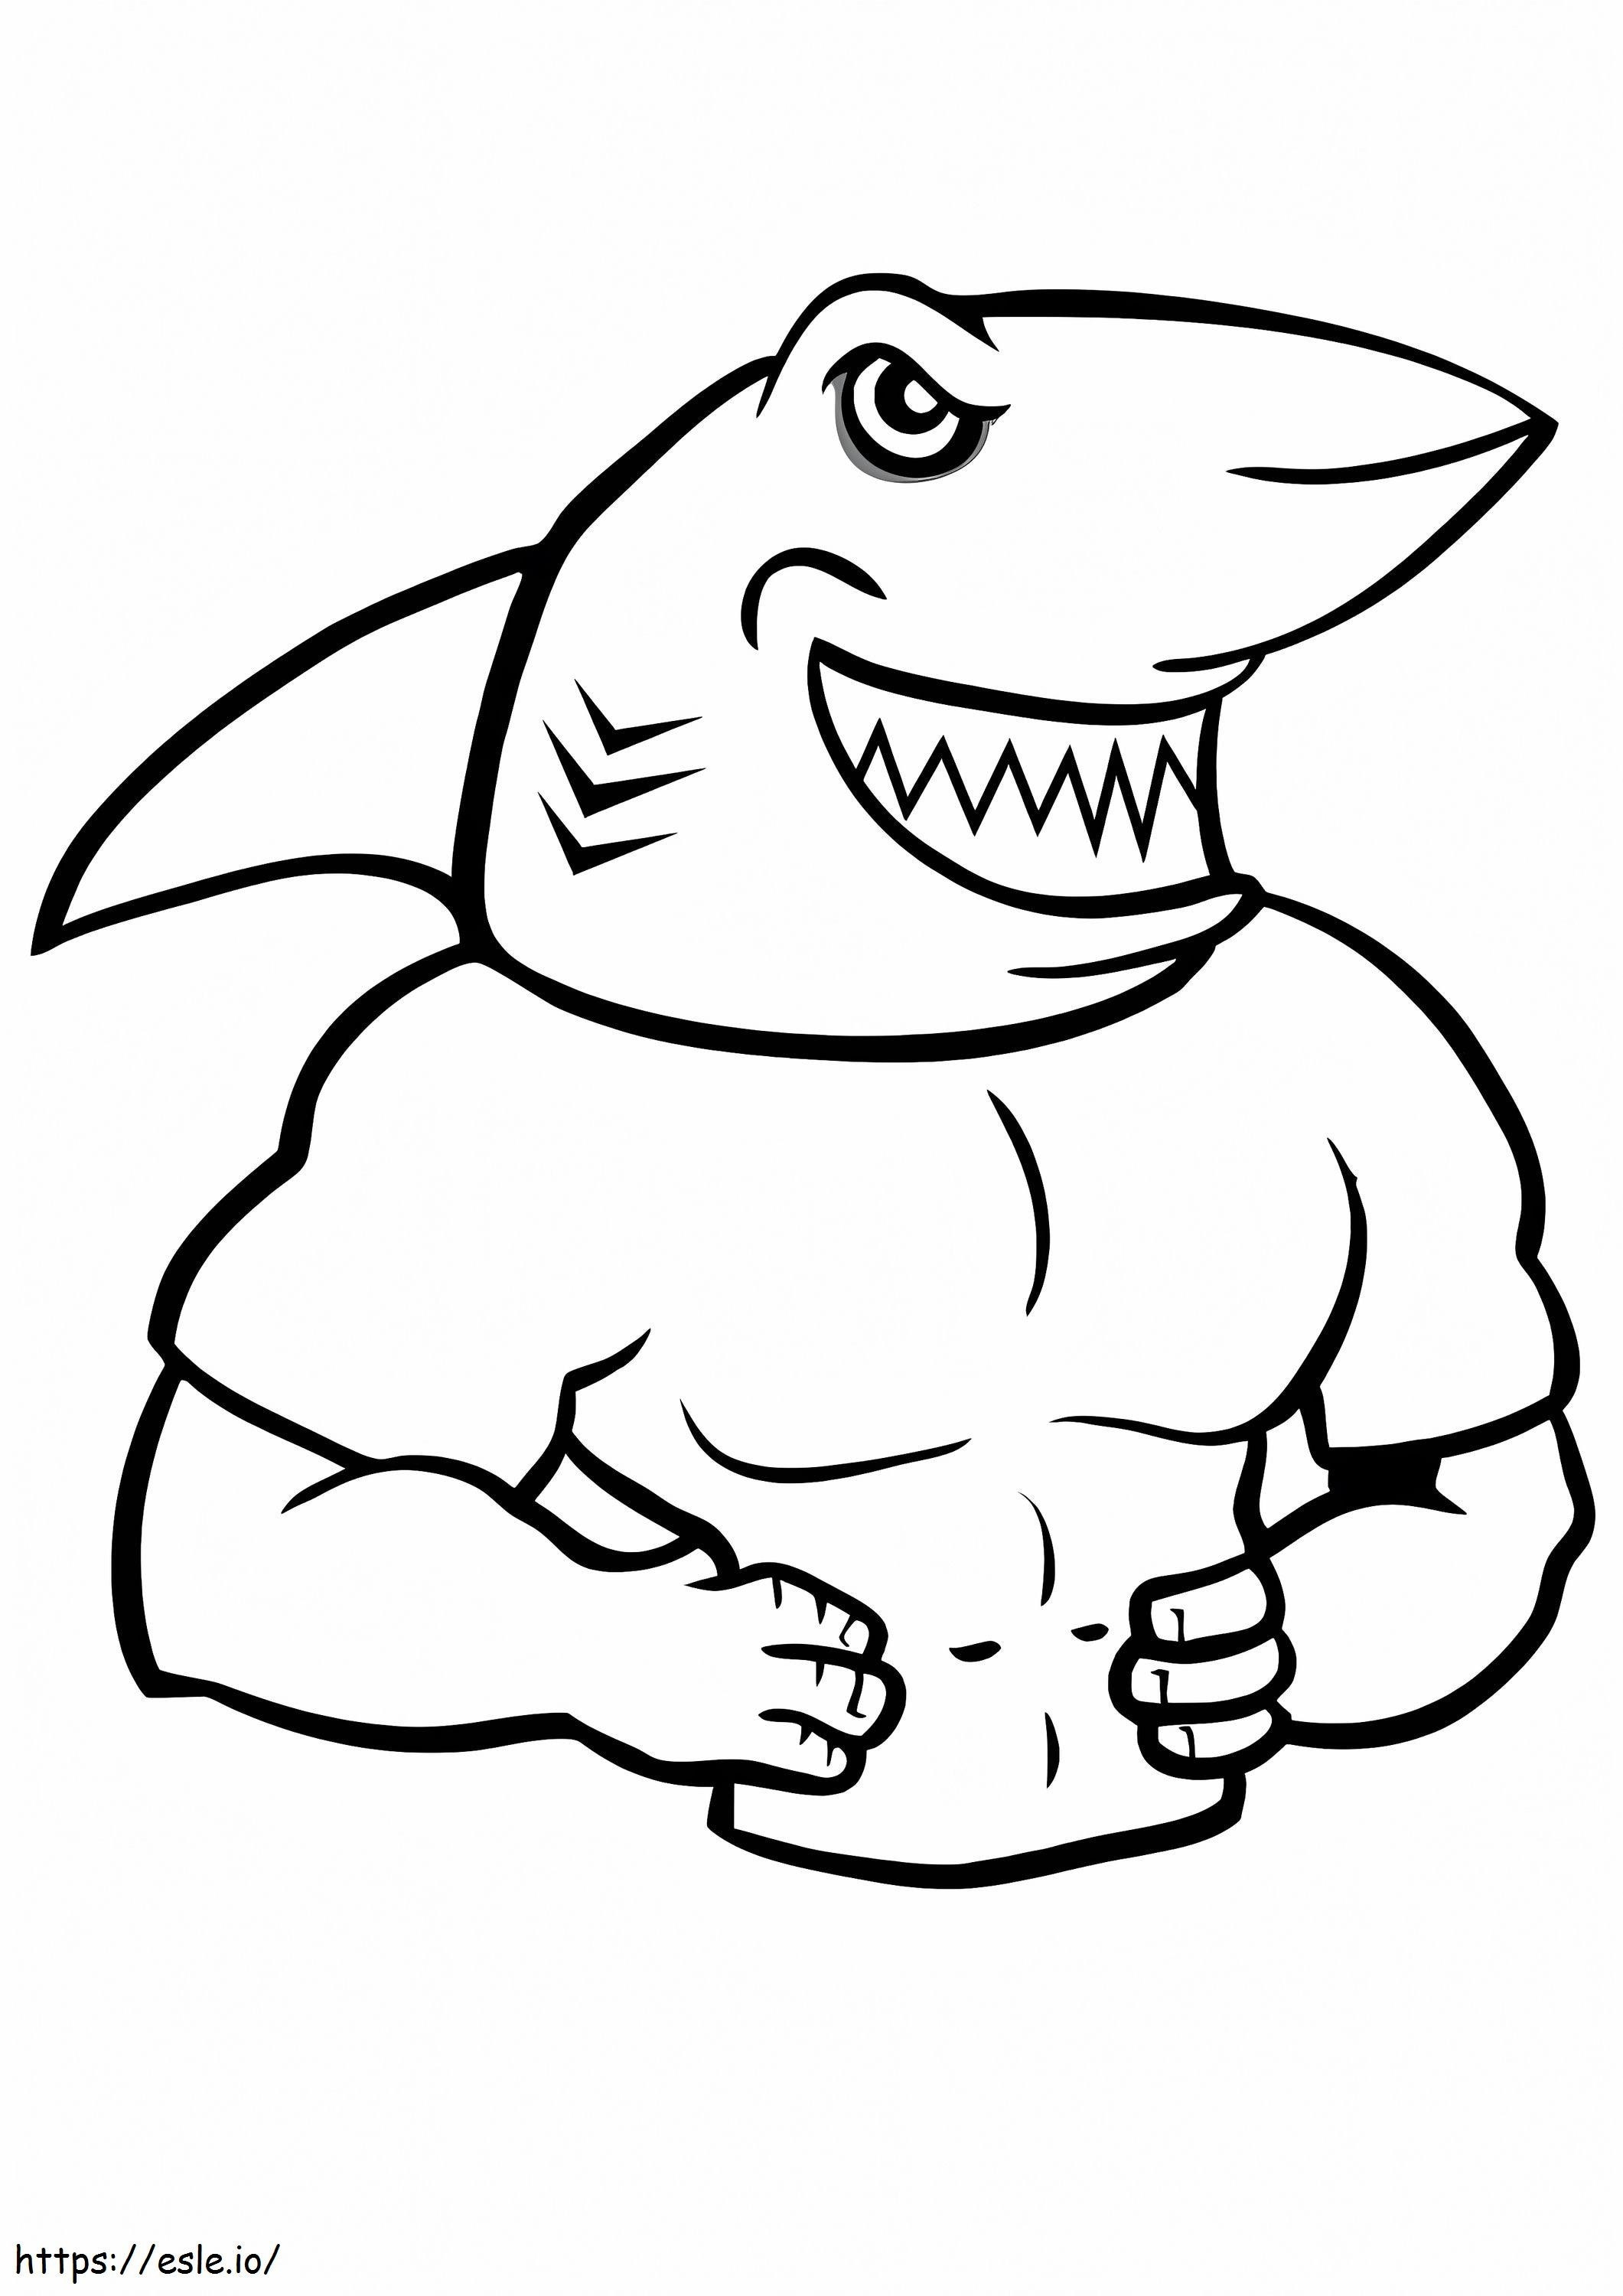 Strong Shark coloring page